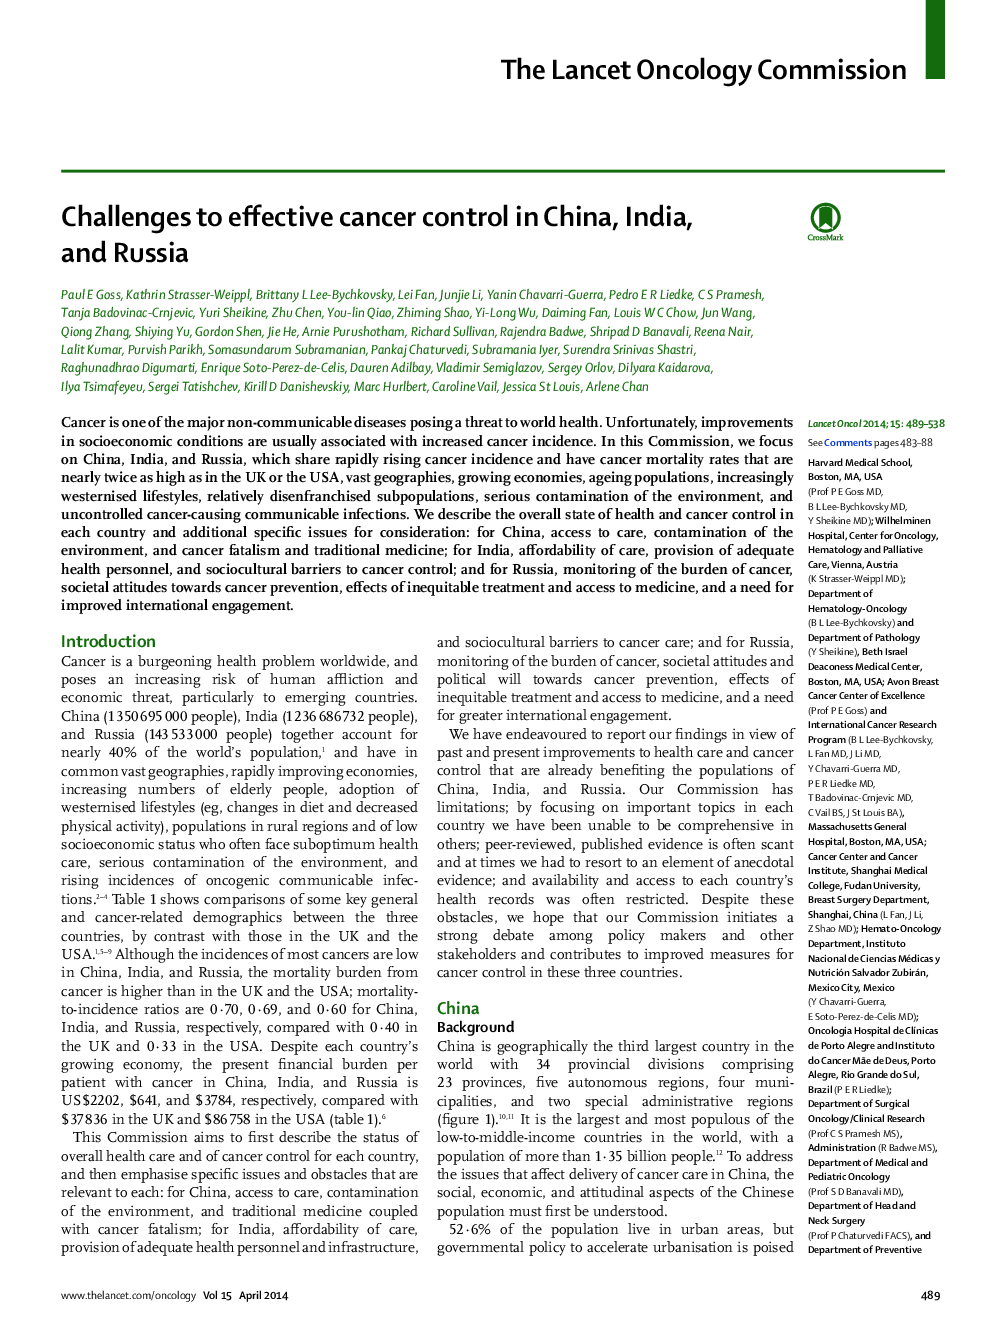 Challenges to effective cancer control in China, India, and Russia